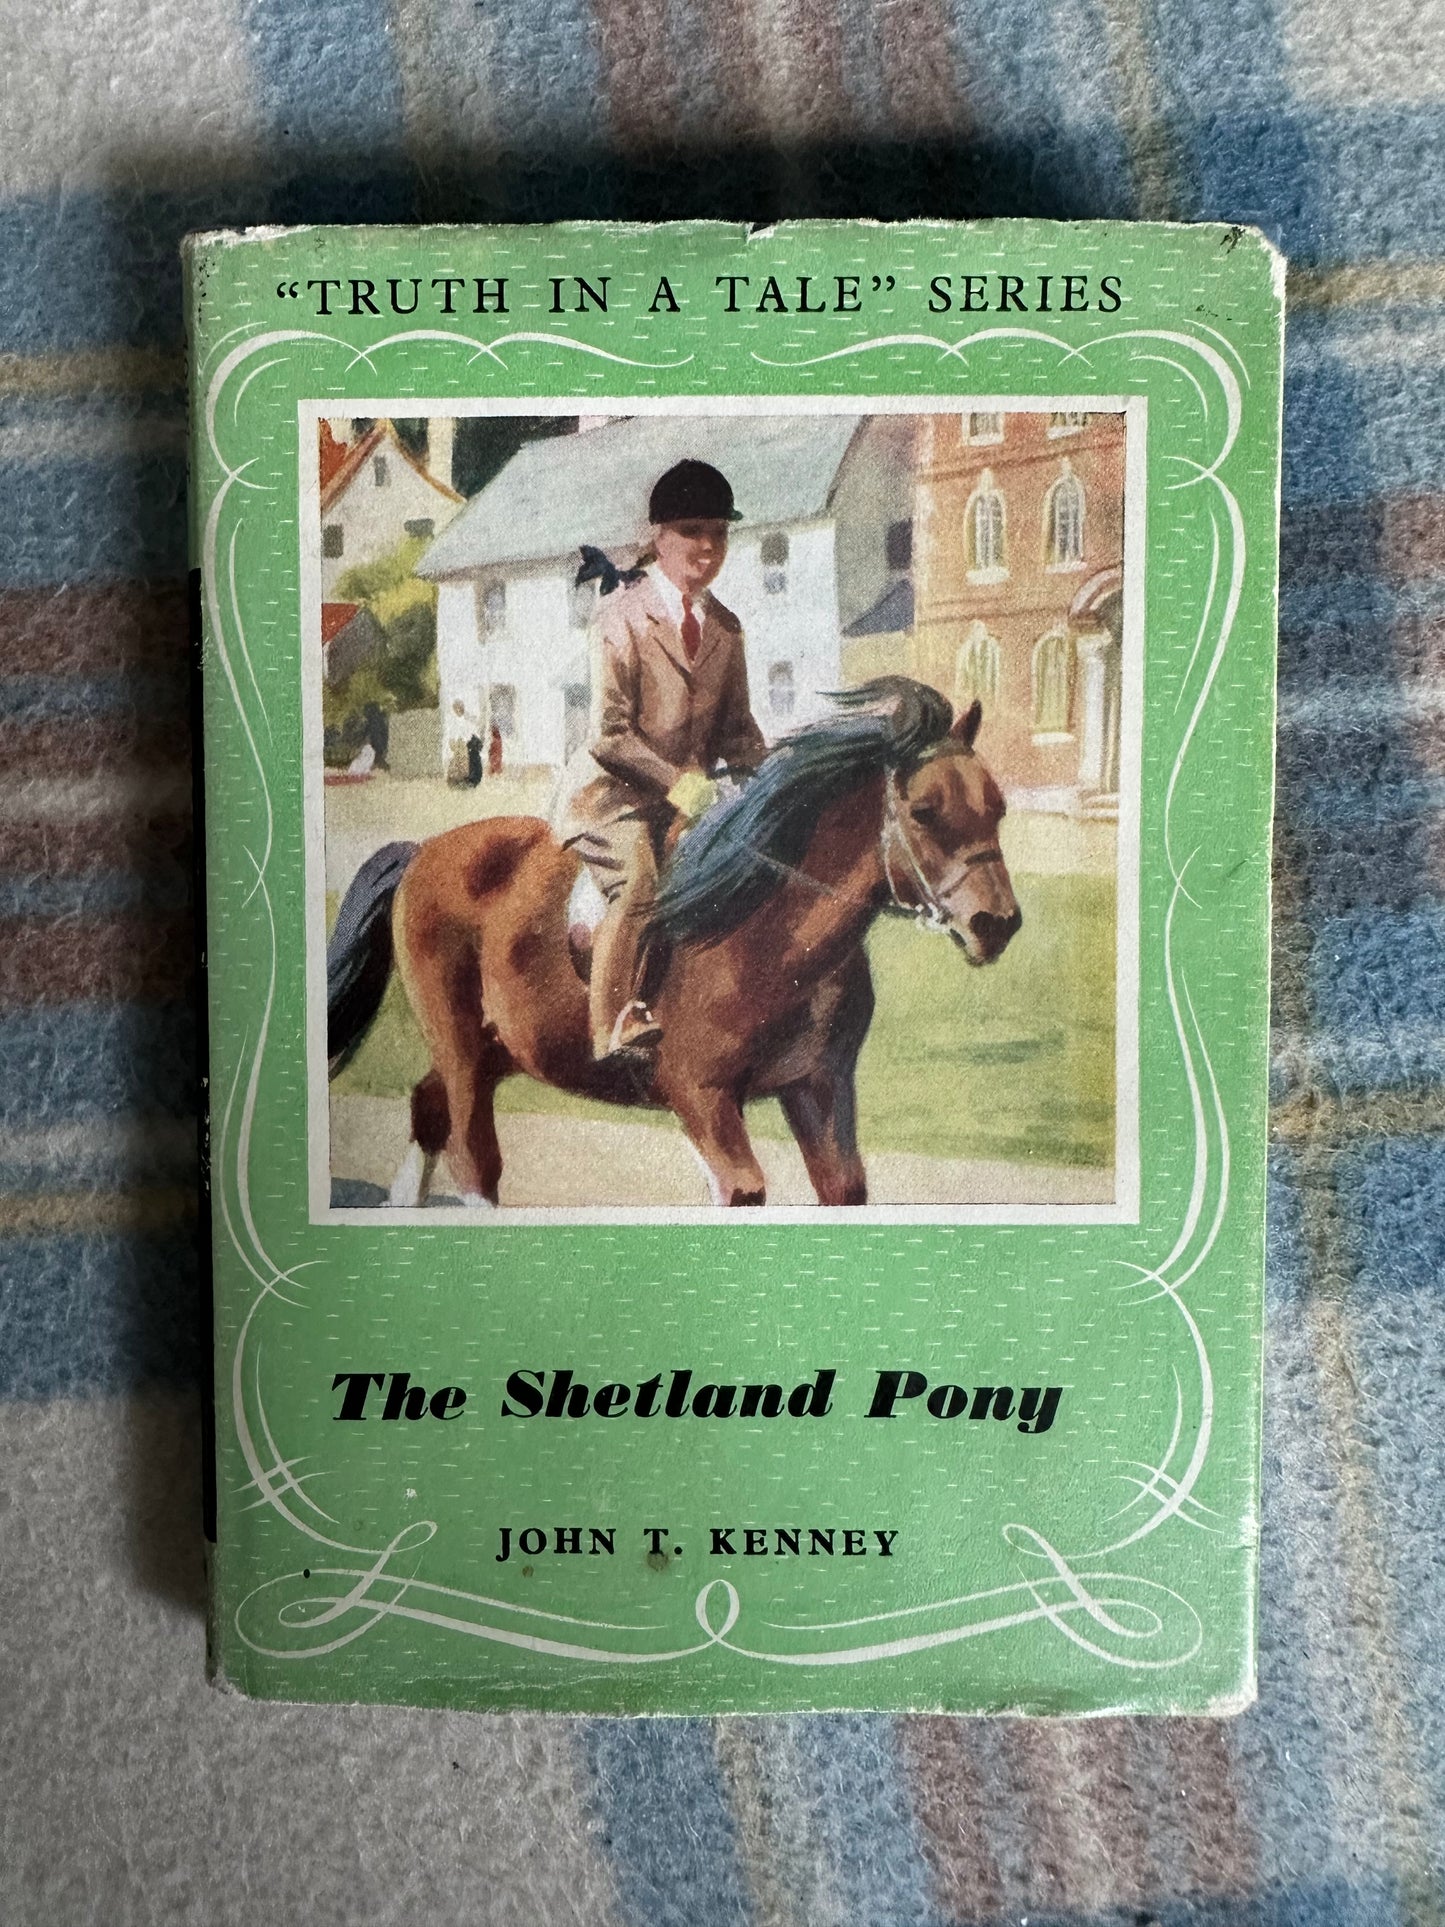 1955*1st* The Shetland Pony(Truth In A Tale Series) John T. Kenney(Edmund Ward Publisher)